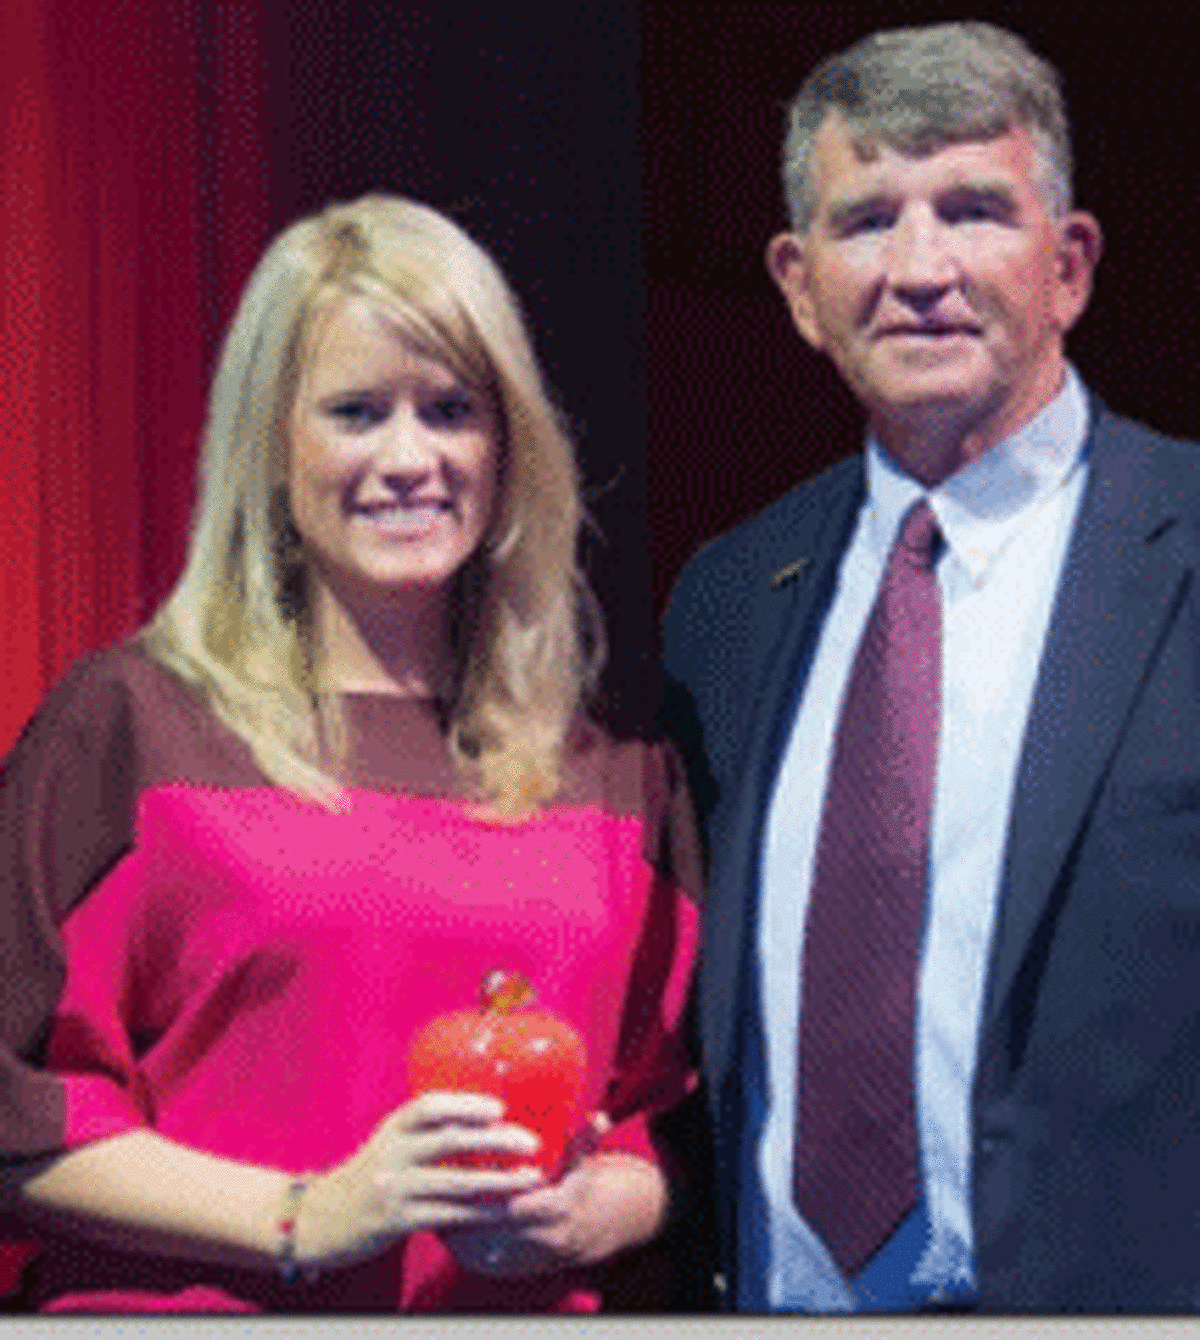 Darcy Smith, a sixth-grade teacher in the Highline School District, is shown with State Superintendent of Public Instruction Randy Dorn in 2012 when Smith was named regional teacher of the year.